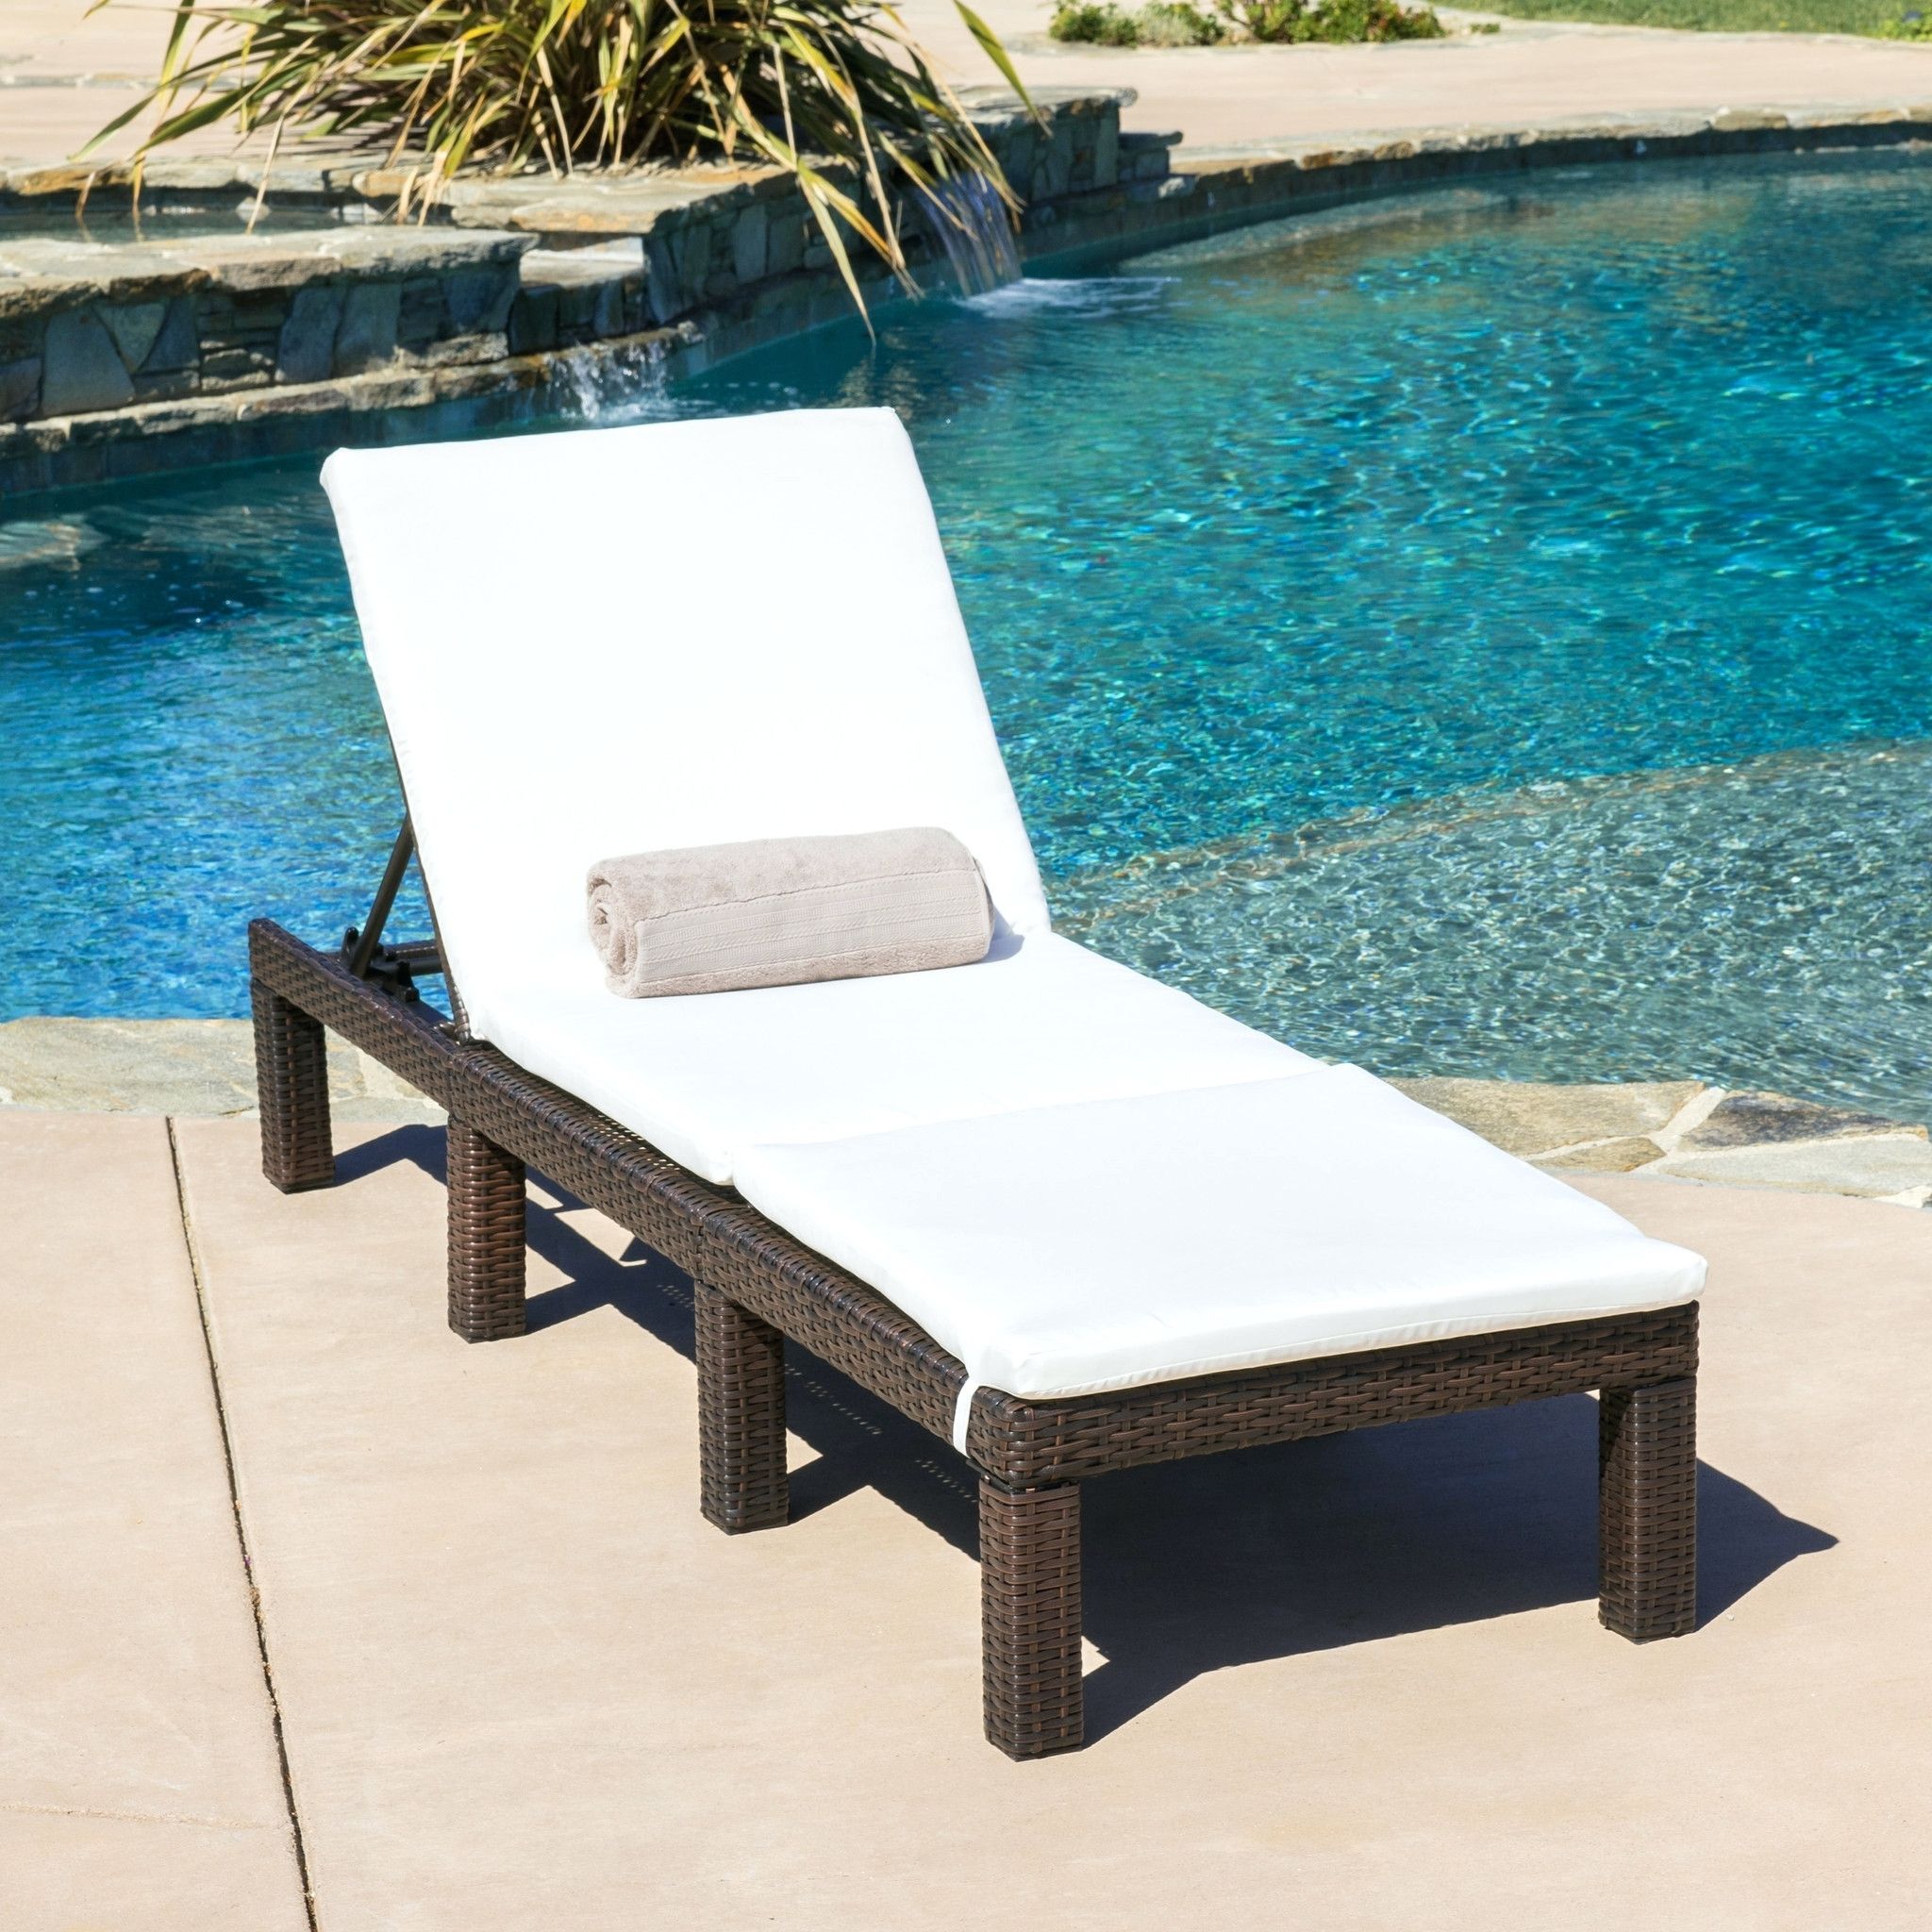 Boca Chaise Lounge Chair Outdoor Pillow • Lounge Chairs Ideas Regarding Preferred Boca Chaise Lounge Outdoor Chairs With Pillows (View 1 of 15)